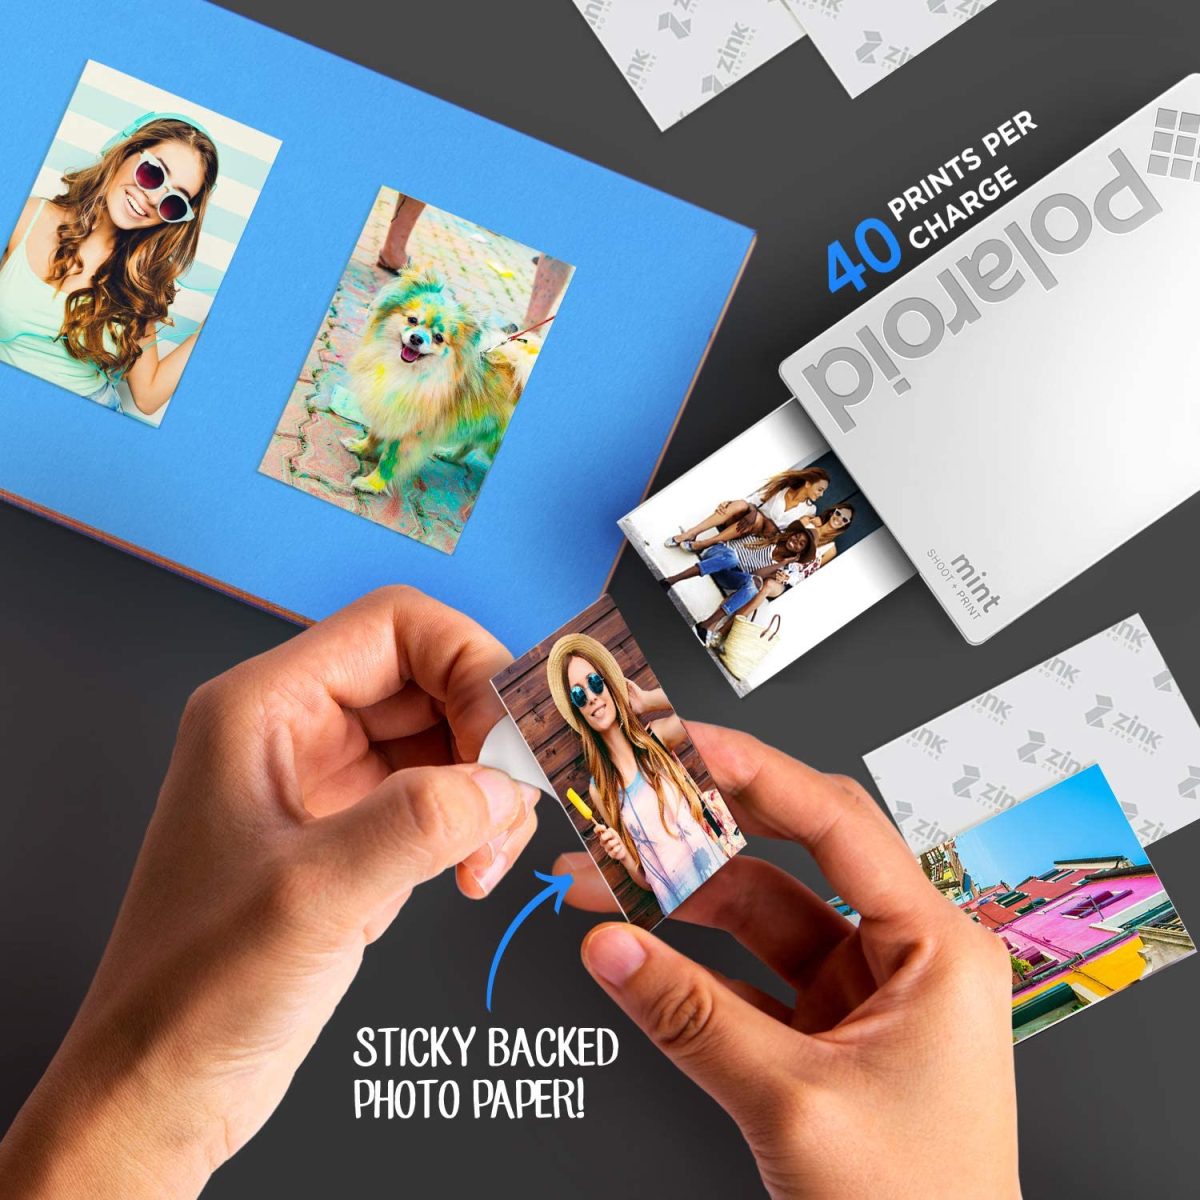 Polaroid Https://Www.youtube.com/Watch?V=Oqivlsmvng8 &Lt;Div Id=&Quot;Featurebullets_Feature_Div&Quot; Class=&Quot;Celwidget&Quot; Data-Feature-Name=&Quot;Featurebullets&Quot; Data-Cel-Widget=&Quot;Featurebullets_Feature_Div&Quot;&Gt; &Lt;Div Id=&Quot;Feature-Bullets&Quot; Class=&Quot;A-Section A-Spacing-Medium A-Spacing-Top-Small&Quot;&Gt; &Lt;Ul Class=&Quot;A-Unordered-List A-Vertical A-Spacing-Mini&Quot;&Gt; &Lt;Li&Gt;&Lt;Span Class=&Quot;A-List-Item&Quot;&Gt;Awesome Handheld Device Lets You Take 16 Megapixel Photographs &Amp; Print Instantly On 2X3 Inches Sticky Back Paper&Lt;/Span&Gt;&Lt;/Li&Gt; &Lt;Li&Gt;&Lt;Span Class=&Quot;A-List-Item&Quot;&Gt;Innovative Zero Ink Technology : There’s No Need For Pricy Toner; Zink Cartridges Combine Paper &Amp; Ink All; Packs Available In 20, 30 Or 50 Sheets&Lt;/Span&Gt;&Lt;/Li&Gt; &Lt;Li&Gt;&Lt;Span Class=&Quot;A-List-Item&Quot;&Gt;Unique Vertical Orientation : Modern Design Lets You Snap Upright, Just Like A Smartphone&Lt;/Span&Gt;&Lt;/Li&Gt; &Lt;Li&Gt;&Lt;Span Class=&Quot;A-List-Item&Quot;&Gt;A Mode For Every Mood : Simple Operation &Amp; Design Includes [6] Easy Picture Settings; Choose From Vibrant Color, Black &Amp; White Or Vintage Effect&Lt;/Span&Gt;&Lt;/Li&Gt; &Lt;Li&Gt;&Lt;Span Class=&Quot;A-List-Item&Quot;&Gt;Fashion Forward &Amp; Travel Friendly : Pick From [5] Fabulously Vibrant Colors; Pocket Sized Camera Measures 4. 6 X 3. 1 X 0. 8 Inches &Amp; Weighs Only 6 Ounces&Lt;/Span&Gt;&Lt;/Li&Gt; &Lt;Li&Gt;&Lt;Span Class=&Quot;A-List-Item&Quot;&Gt;Viewfinder Type: Optical&Lt;/Span&Gt;&Lt;/Li&Gt; &Lt;/Ul&Gt; &Lt;/Div&Gt; &Lt;/Div&Gt; Polaroid Polaroid Mint Instant Print Digital Camera -White